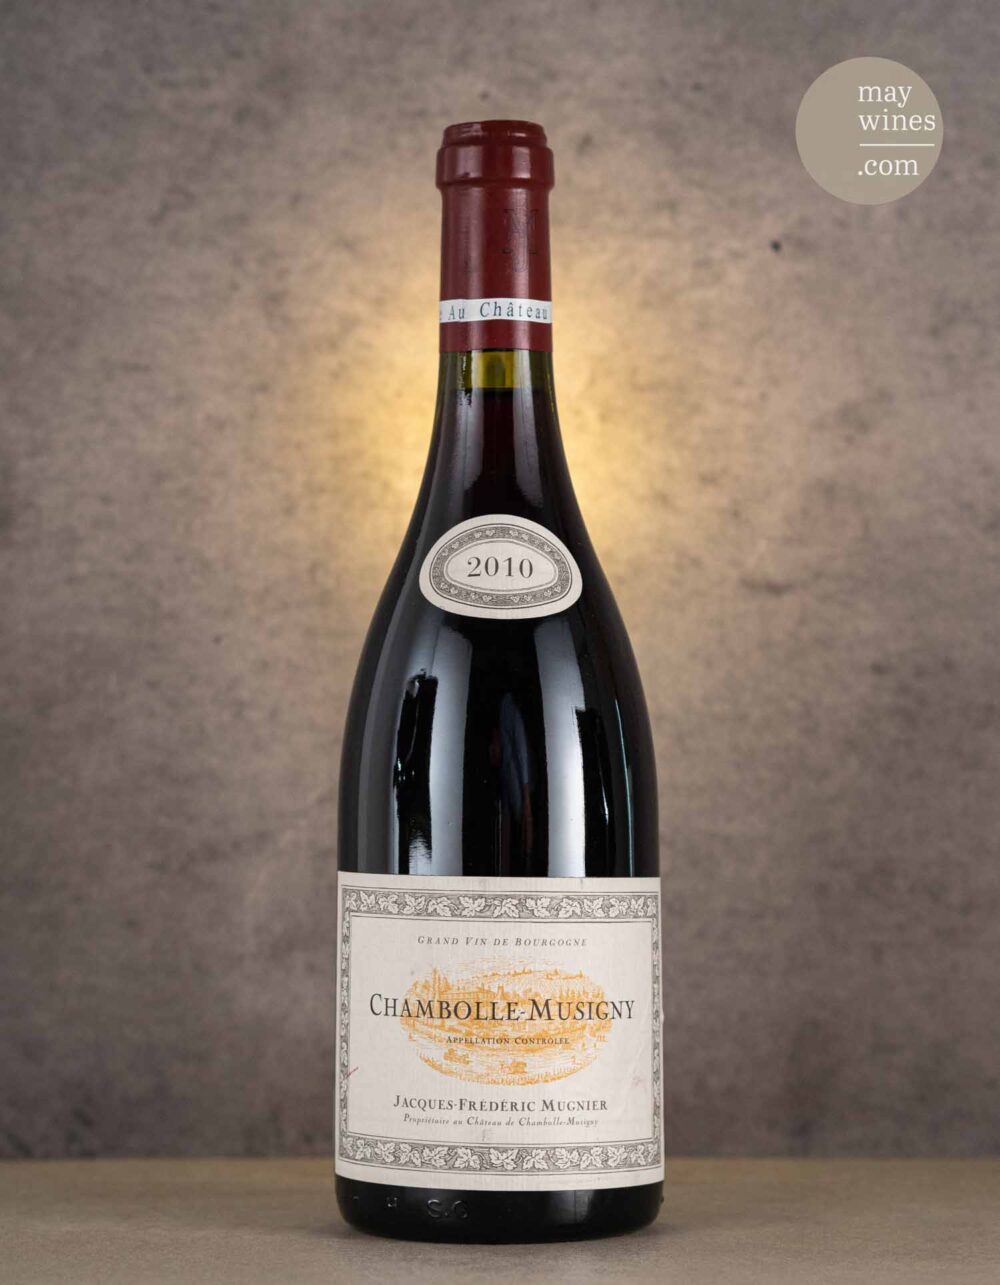 May Wines – Rotwein – 2010 Chambolle-Musigny AC - Jacques-Frédéric Mugnier